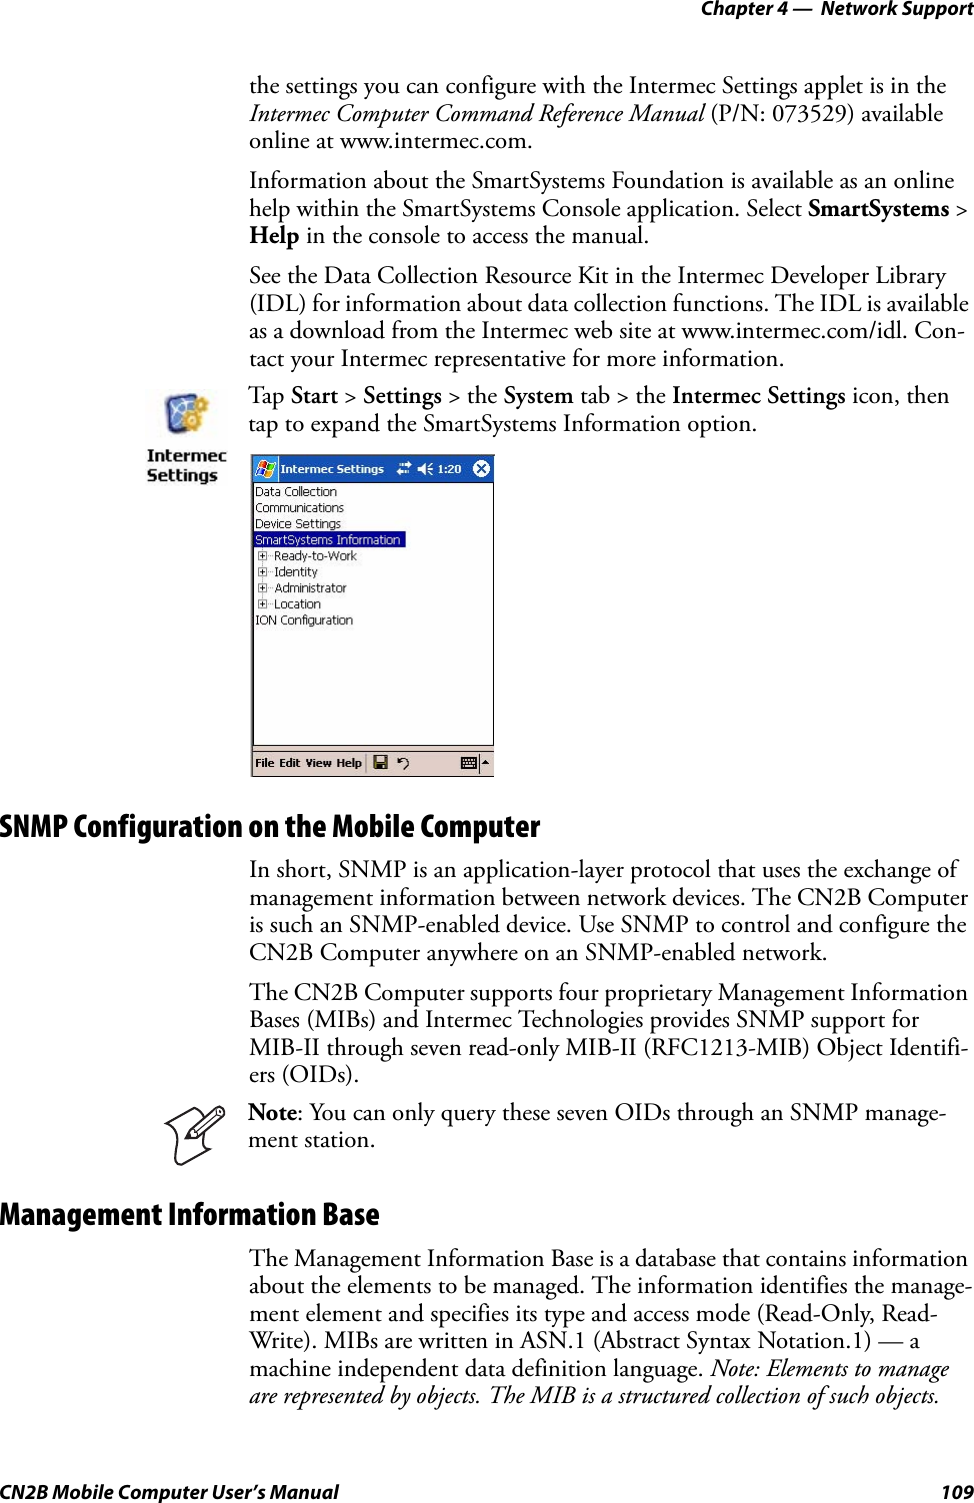 Chapter 4 —  Network SupportCN2B Mobile Computer User’s Manual 109the settings you can configure with the Intermec Settings applet is in the Intermec Computer Command Reference Manual (P/N: 073529) available online at www.intermec.com.Information about the SmartSystems Foundation is available as an online help within the SmartSystems Console application. Select SmartSystems &gt; Help in the console to access the manual.See the Data Collection Resource Kit in the Intermec Developer Library (IDL) for information about data collection functions. The IDL is available as a download from the Intermec web site at www.intermec.com/idl. Con-tact your Intermec representative for more information. SNMP Configuration on the Mobile ComputerIn short, SNMP is an application-layer protocol that uses the exchange of management information between network devices. The CN2B Computer is such an SNMP-enabled device. Use SNMP to control and configure the CN2B Computer anywhere on an SNMP-enabled network.The CN2B Computer supports four proprietary Management Information Bases (MIBs) and Intermec Technologies provides SNMP support for MIB-II through seven read-only MIB-II (RFC1213-MIB) Object Identifi-ers (OIDs).Management Information BaseThe Management Information Base is a database that contains information about the elements to be managed. The information identifies the manage-ment element and specifies its type and access mode (Read-Only, Read-Write). MIBs are written in ASN.1 (Abstract Syntax Notation.1) — a machine independent data definition language. Note: Elements to manage are represented by objects. The MIB is a structured collection of such objects. Tap  Start &gt; Settings &gt; the System tab &gt; the Intermec Settings icon, then tap to expand the SmartSystems Information option.Note: You can only query these seven OIDs through an SNMP manage-ment station.